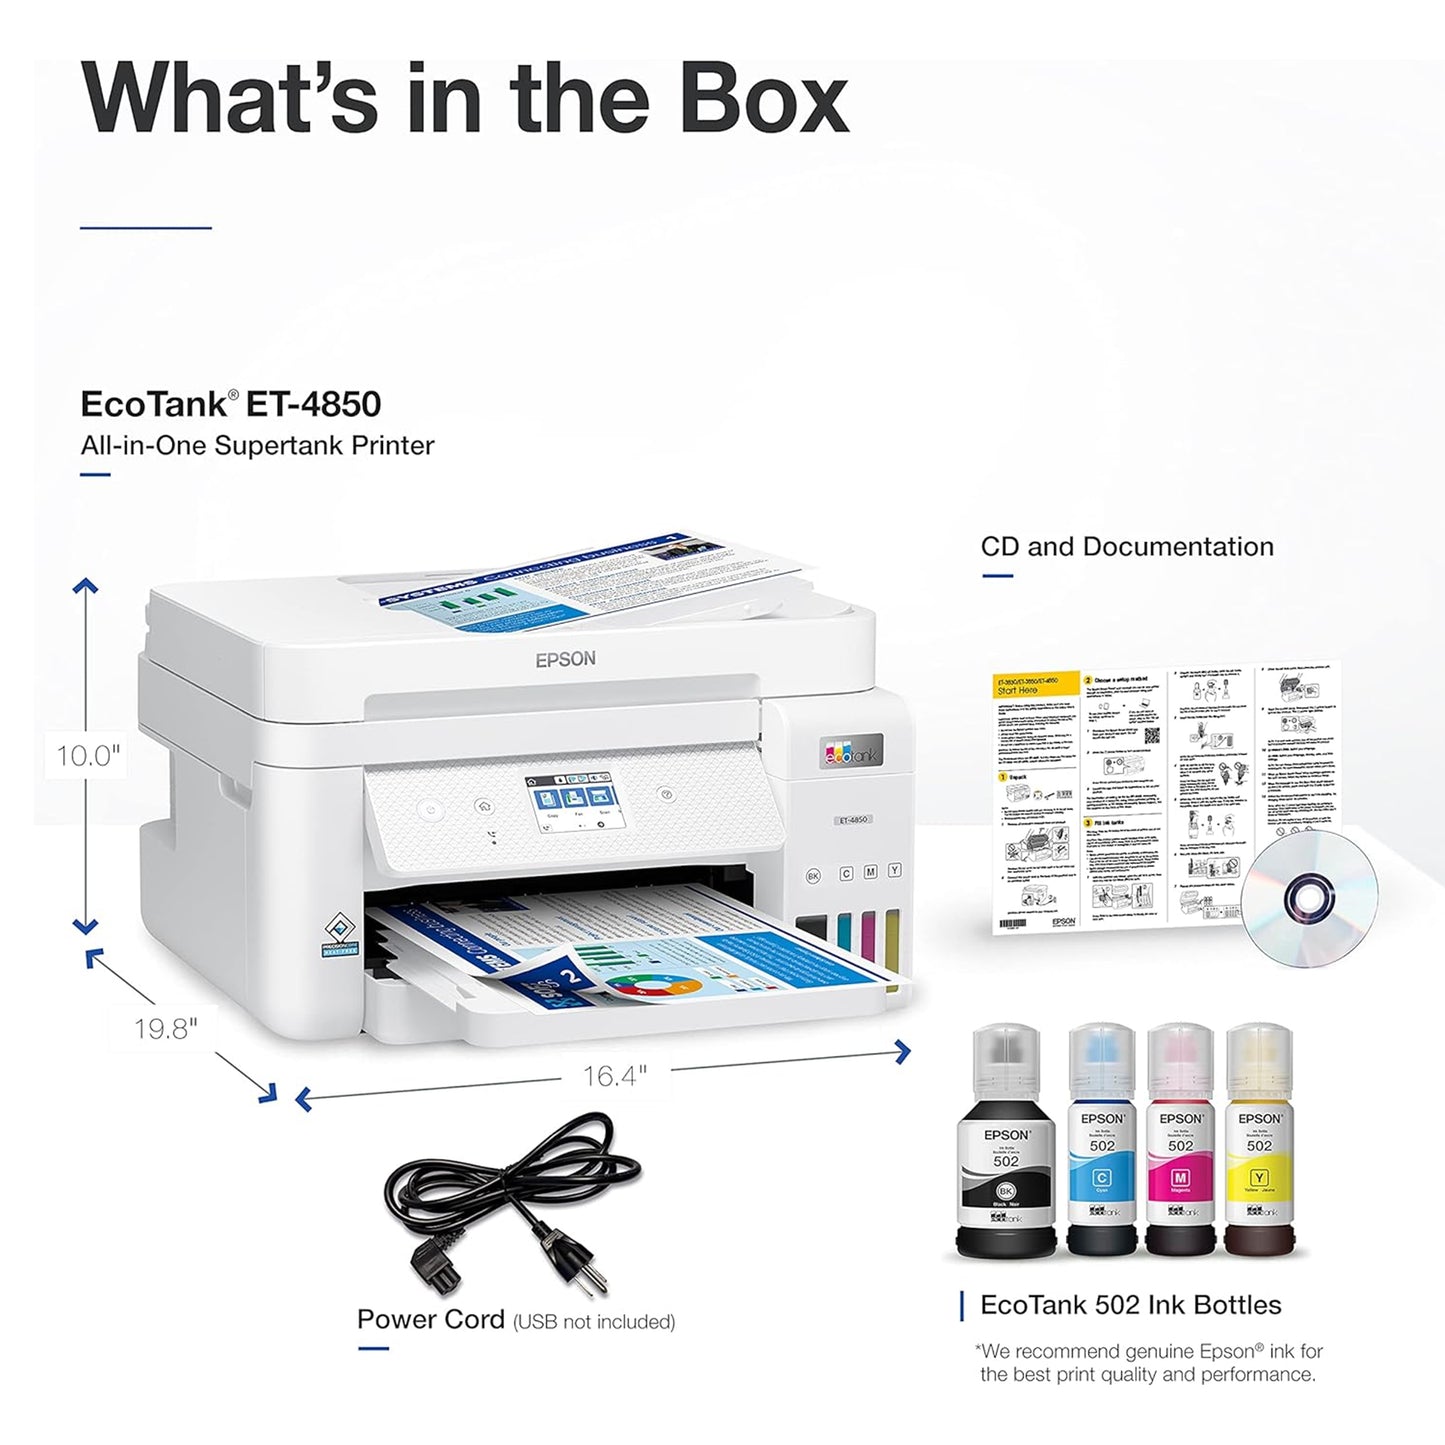 Epson EcoTank ET-4850 Wireless All-in-One Cartridge-Free Supertank Printer with Scanner, Copier, Fax, ADF and Ethernet (Renewed/Refurbished), White